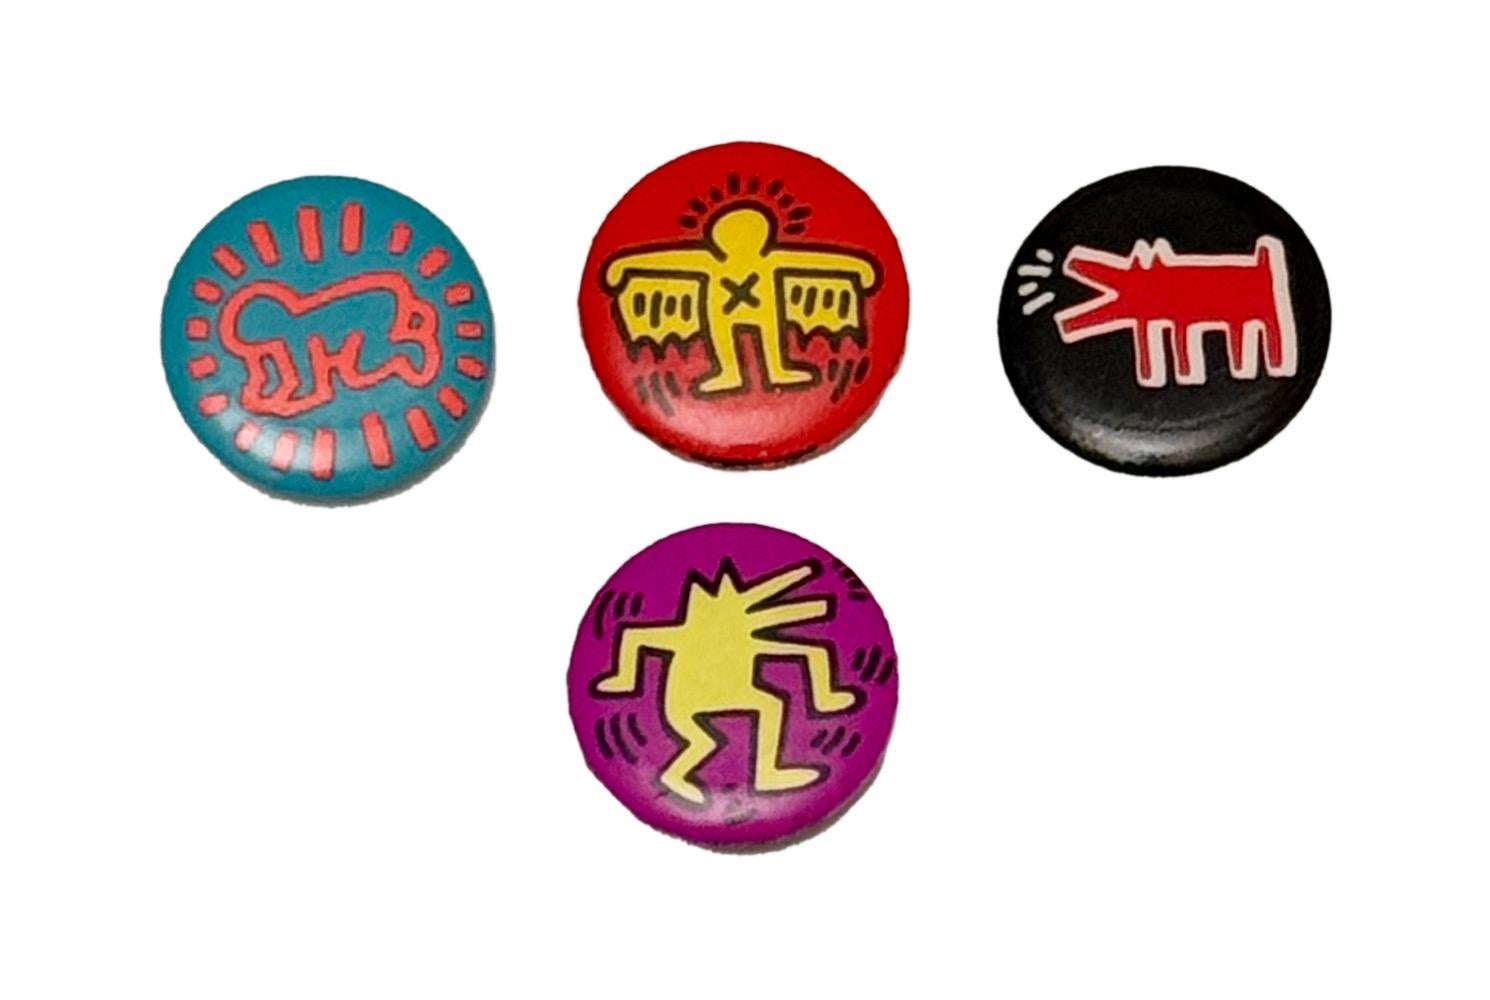 A set of 4 vintage Keith Haring Pop Shop lapel pins, circa 1986-1987 featuring some of the artist's most iconic images.

Original circa mid-late 1980s (Not later reproductions) 
Small coin sized pins in good vintage condition

Pop Shop History:
In